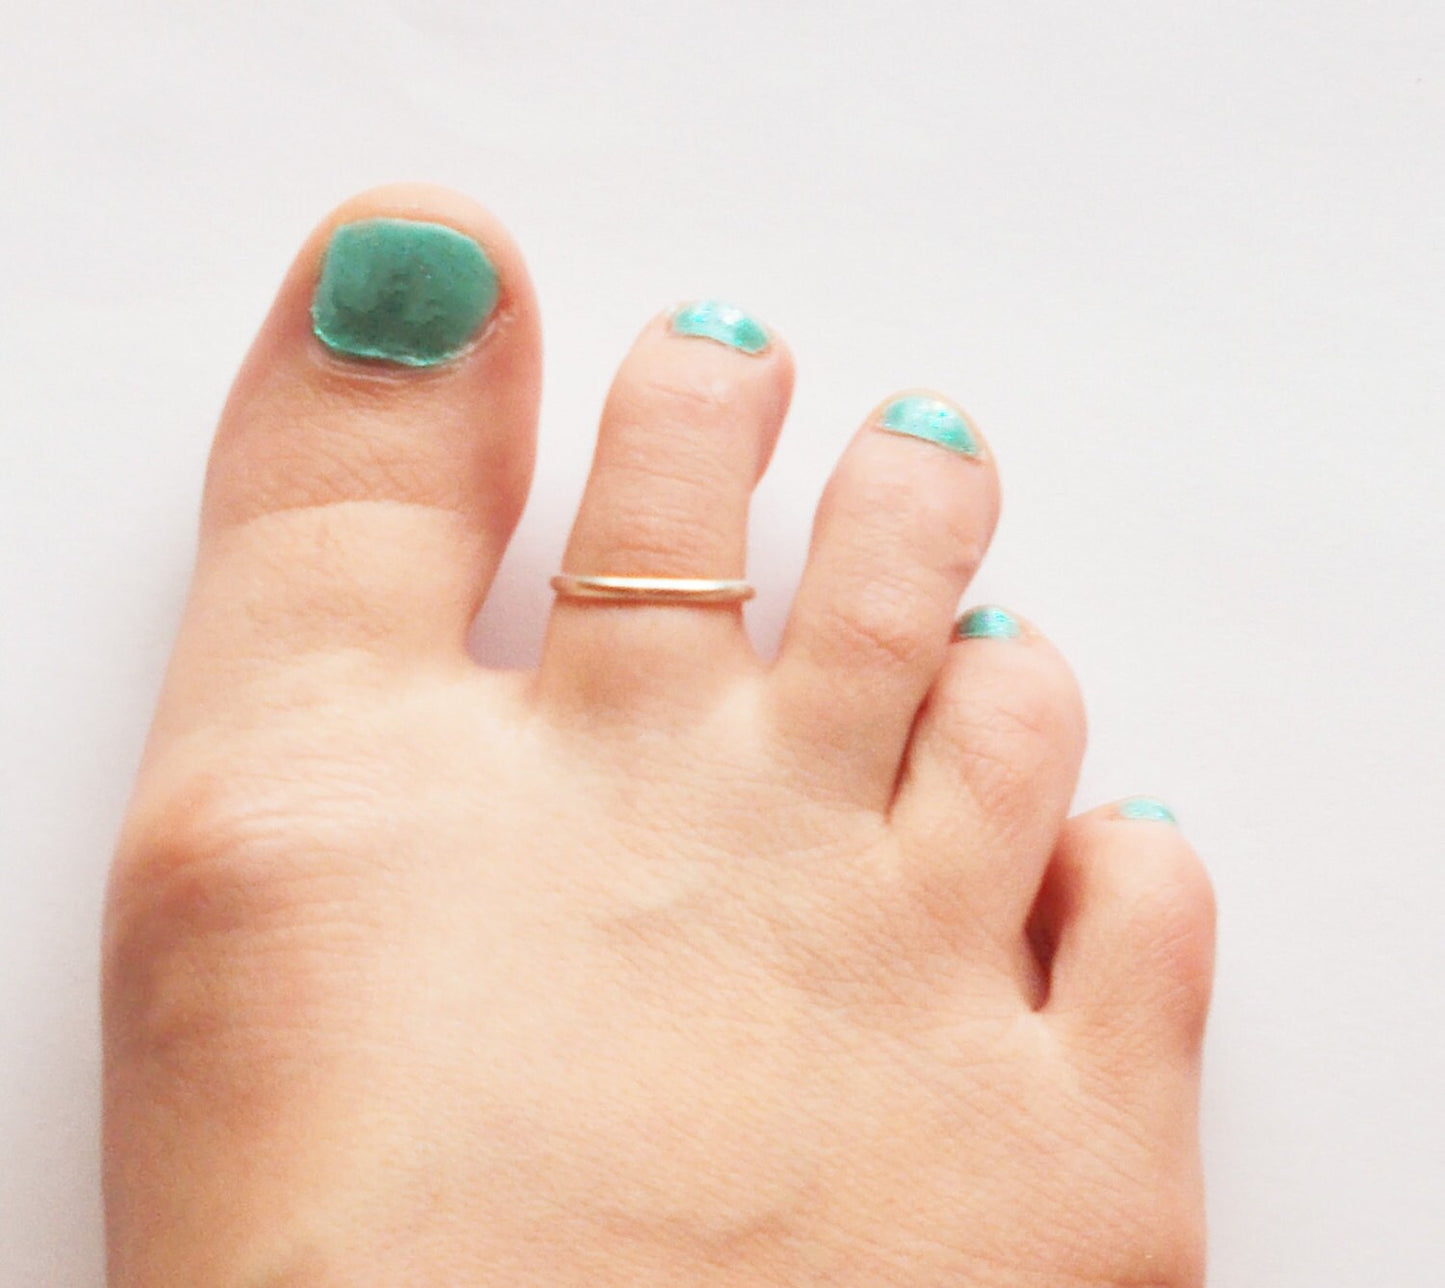 Adjustable Sterling Silver Toe Ring - Simple Toe Ring